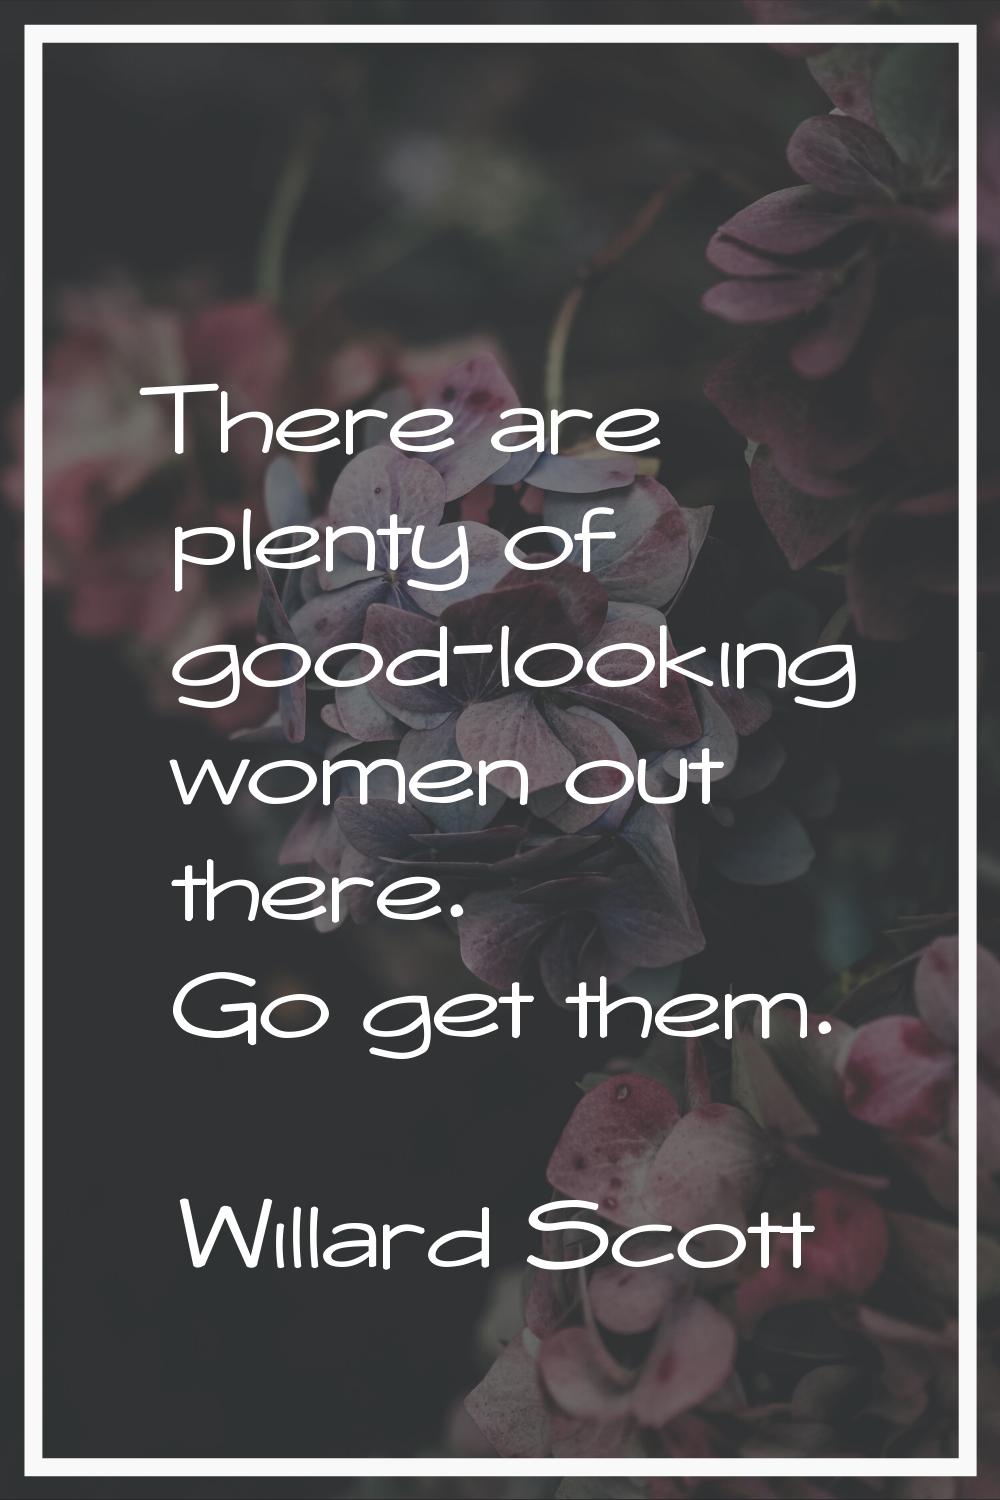 There are plenty of good-looking women out there. Go get them.